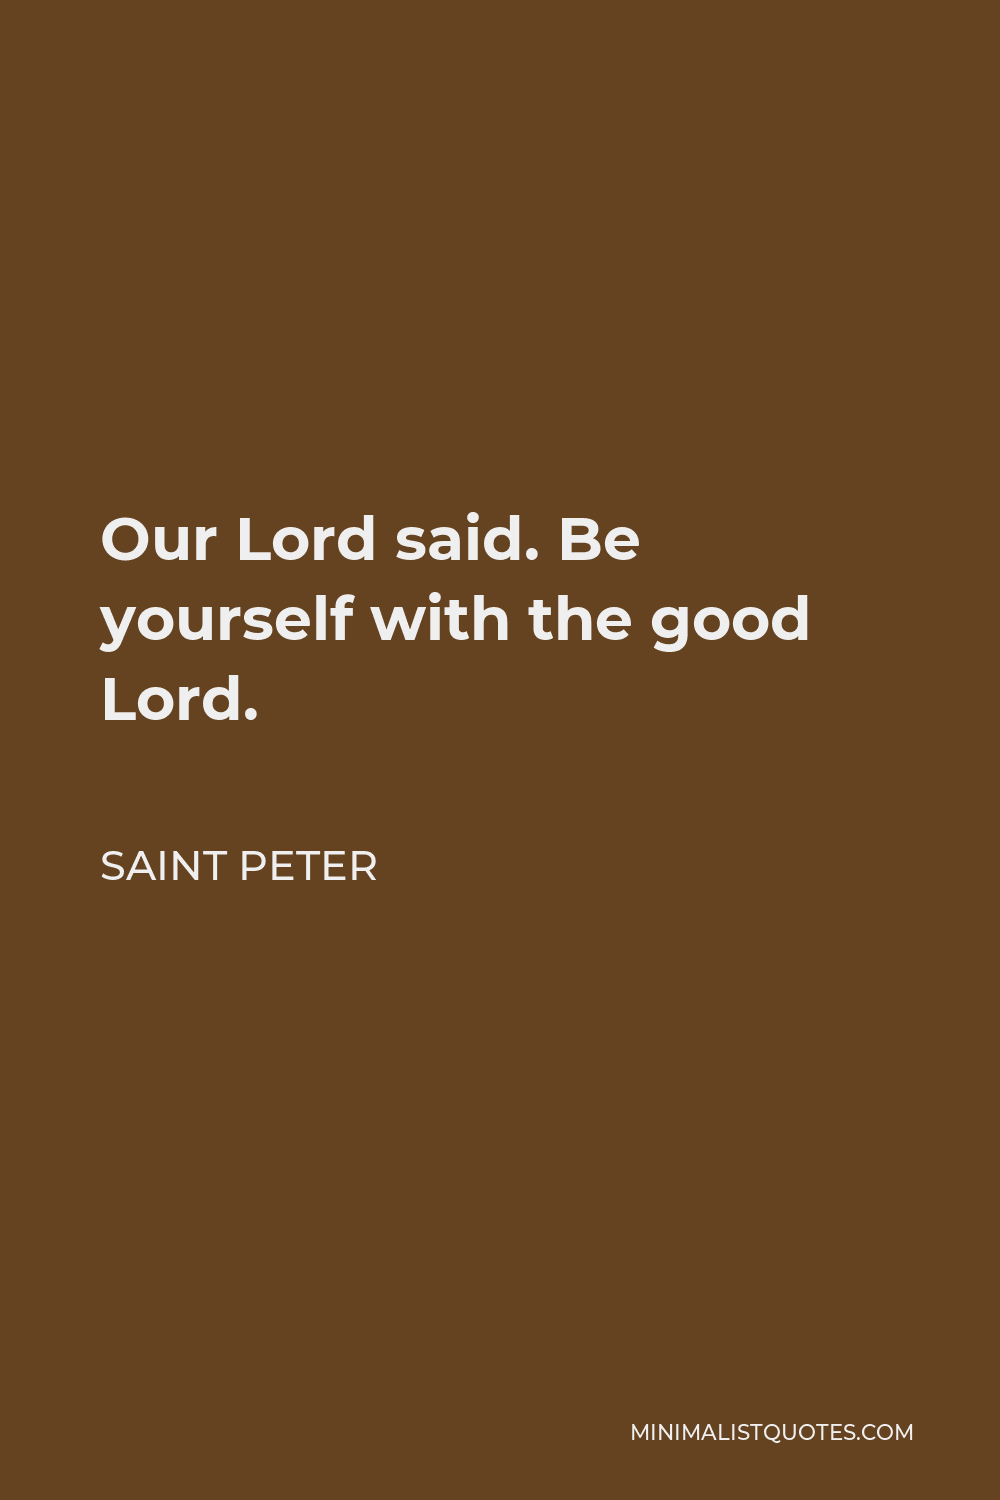 Saint Peter Quote - Our Lord said. Be yourself with the good Lord.